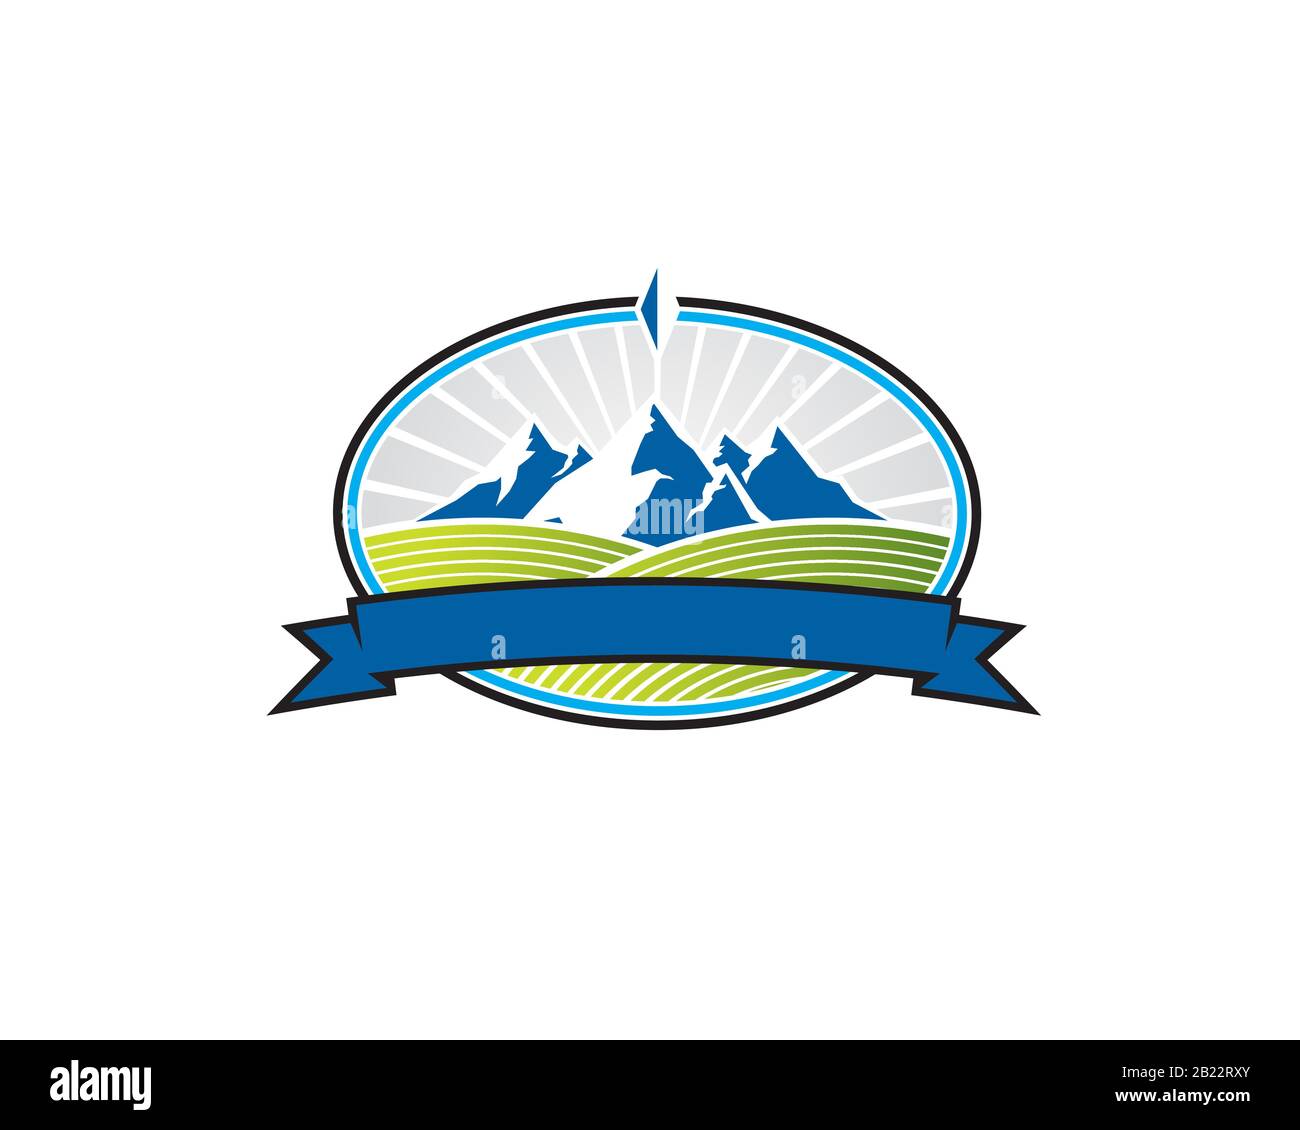 emblem coat of arm illustration logo of an icy snowy blue mountain uppon green hill valey crops ground inside elipse with ribbon Stock Vector